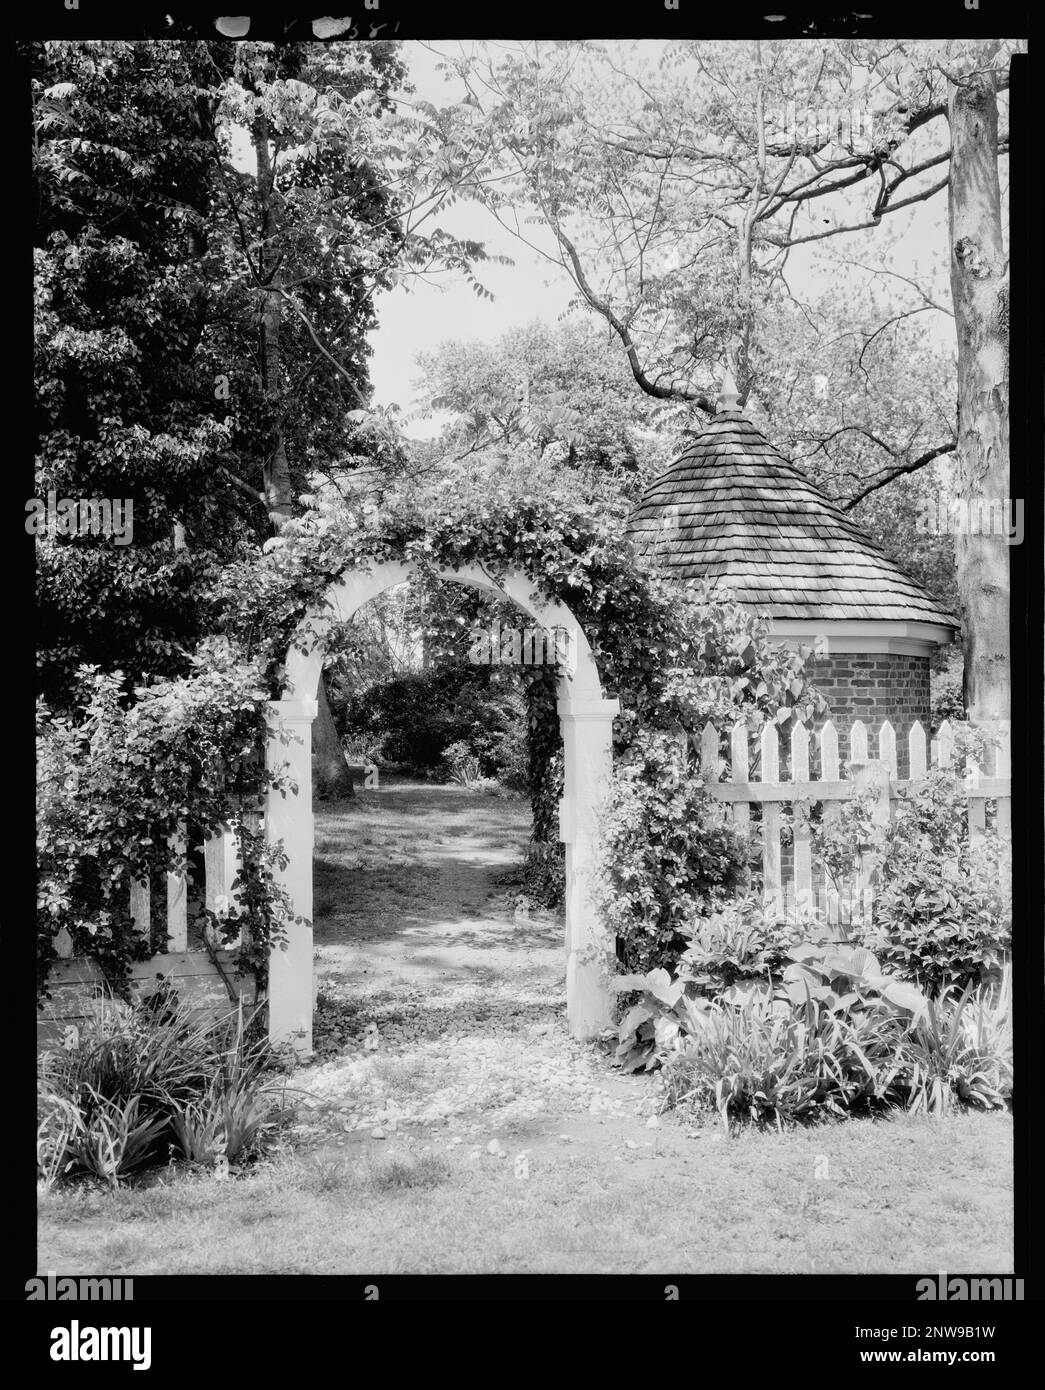 Brandon, Surry vic., Prince George County, Virginia. Carnegie Survey of the Architecture of the South. United States  Virginia  Prince George County  Surry vic, Arbors , Bowers, Fences, Gardens, Estates. Stock Photo